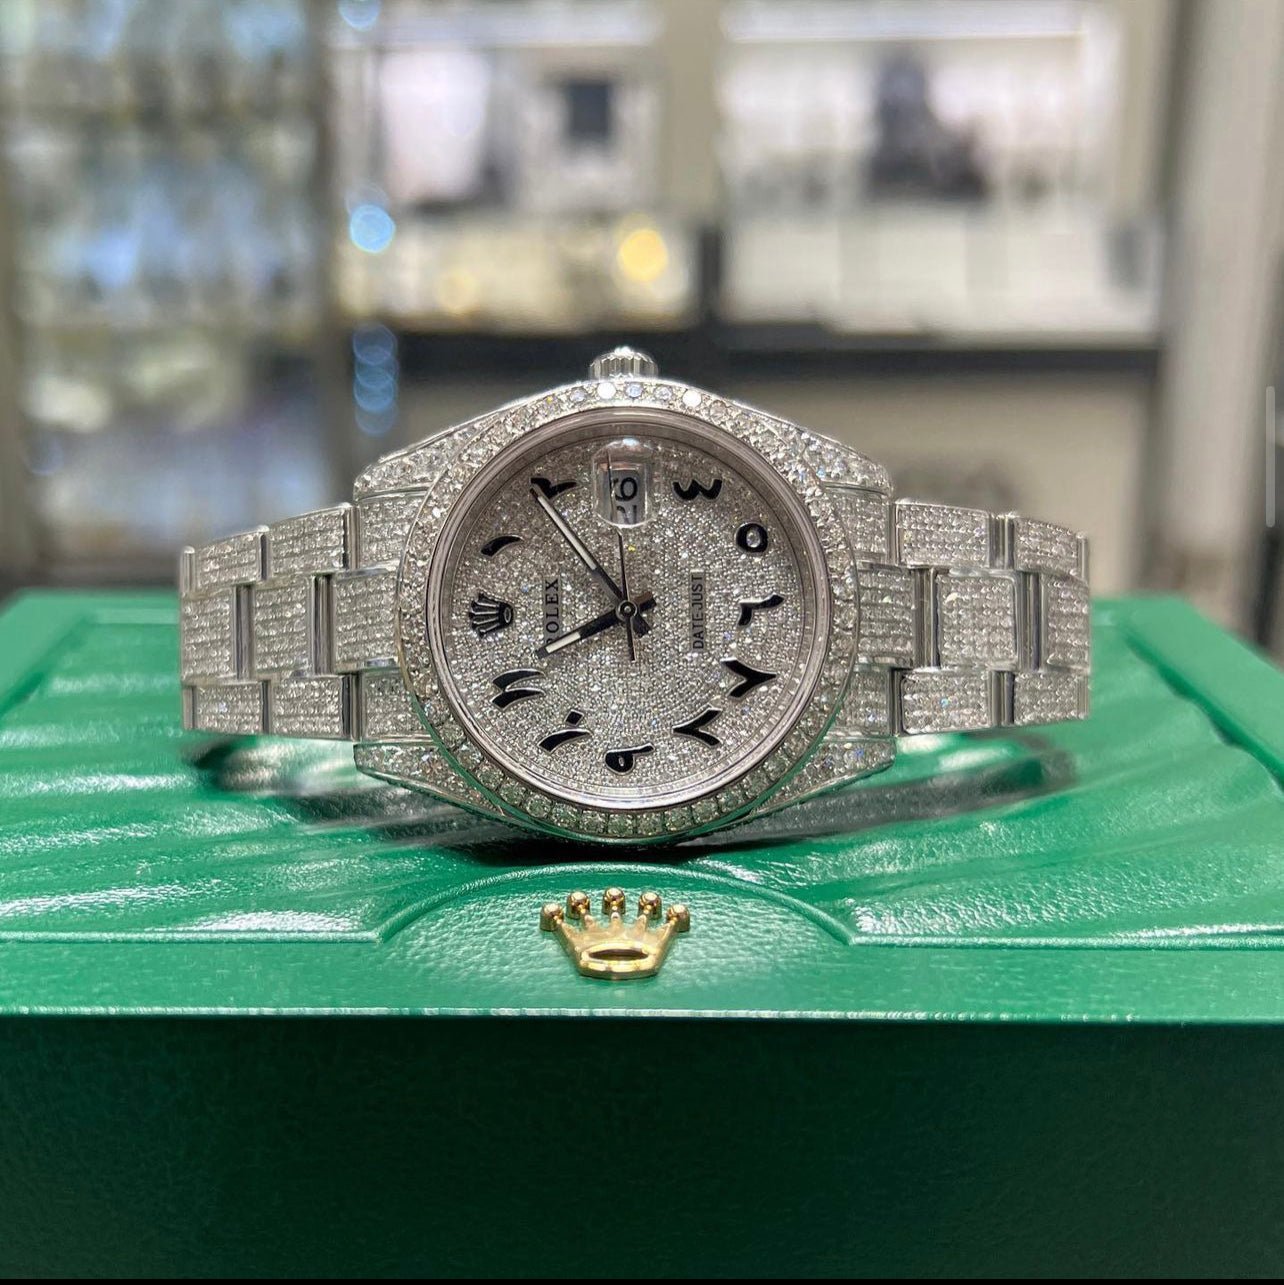 Rolex Datejust Iced Out - Juwelier BenjaminRolex Datejust Iced Out